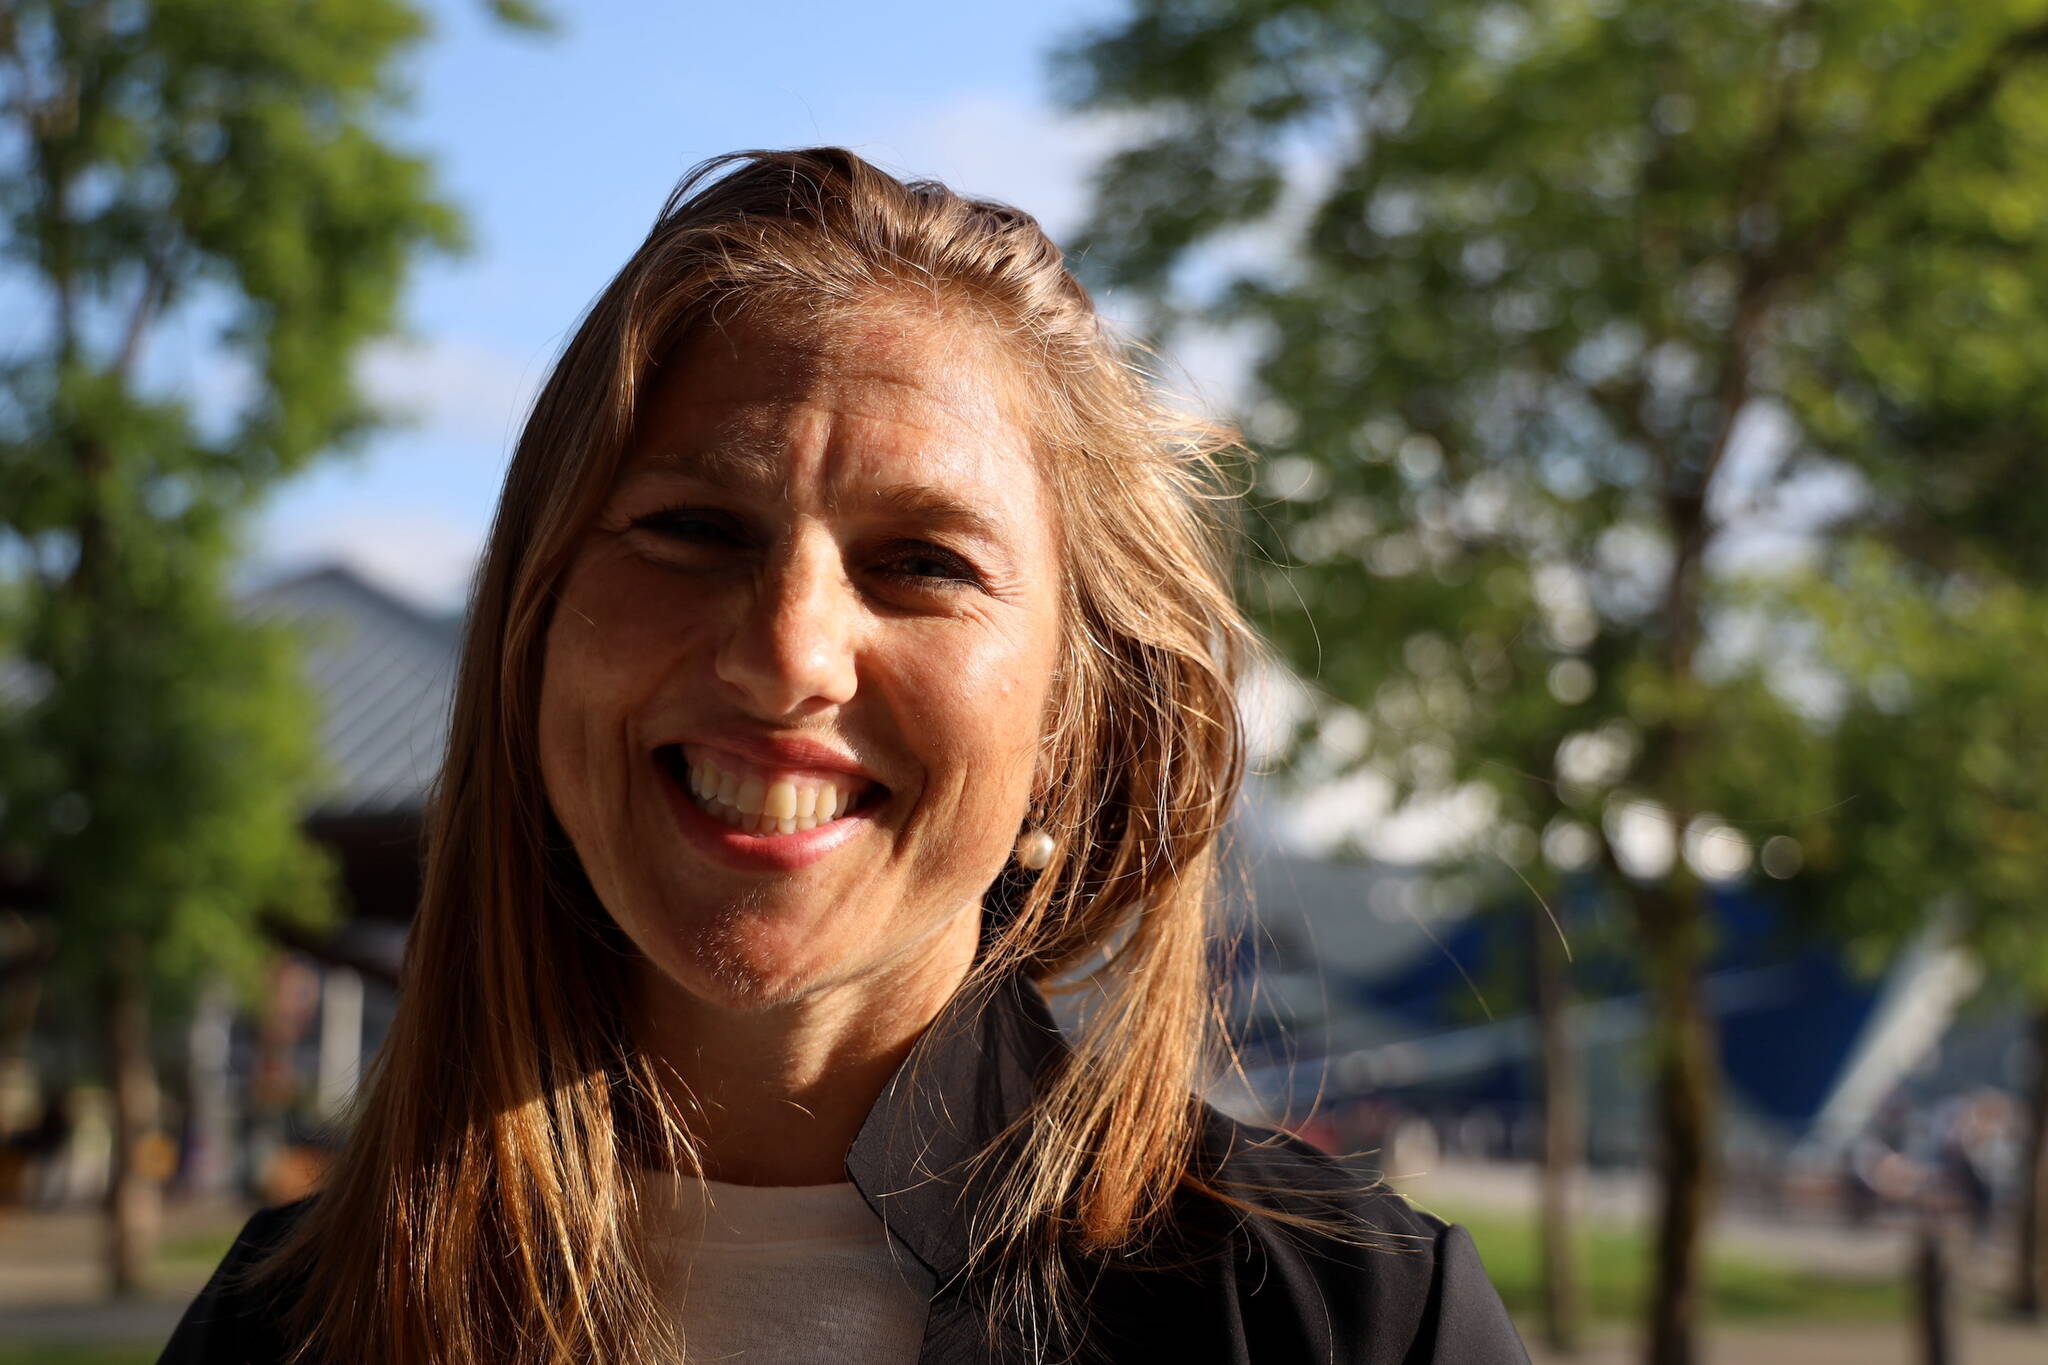 City Public Works and Engineering Director Katie Koester smiles for a photo downtown Wednesday evening. Koester was selected by the Assembly to serve as the next city manager following the retirement of Rorie Watt in September. (Clarise Larson / Juneau Empire)